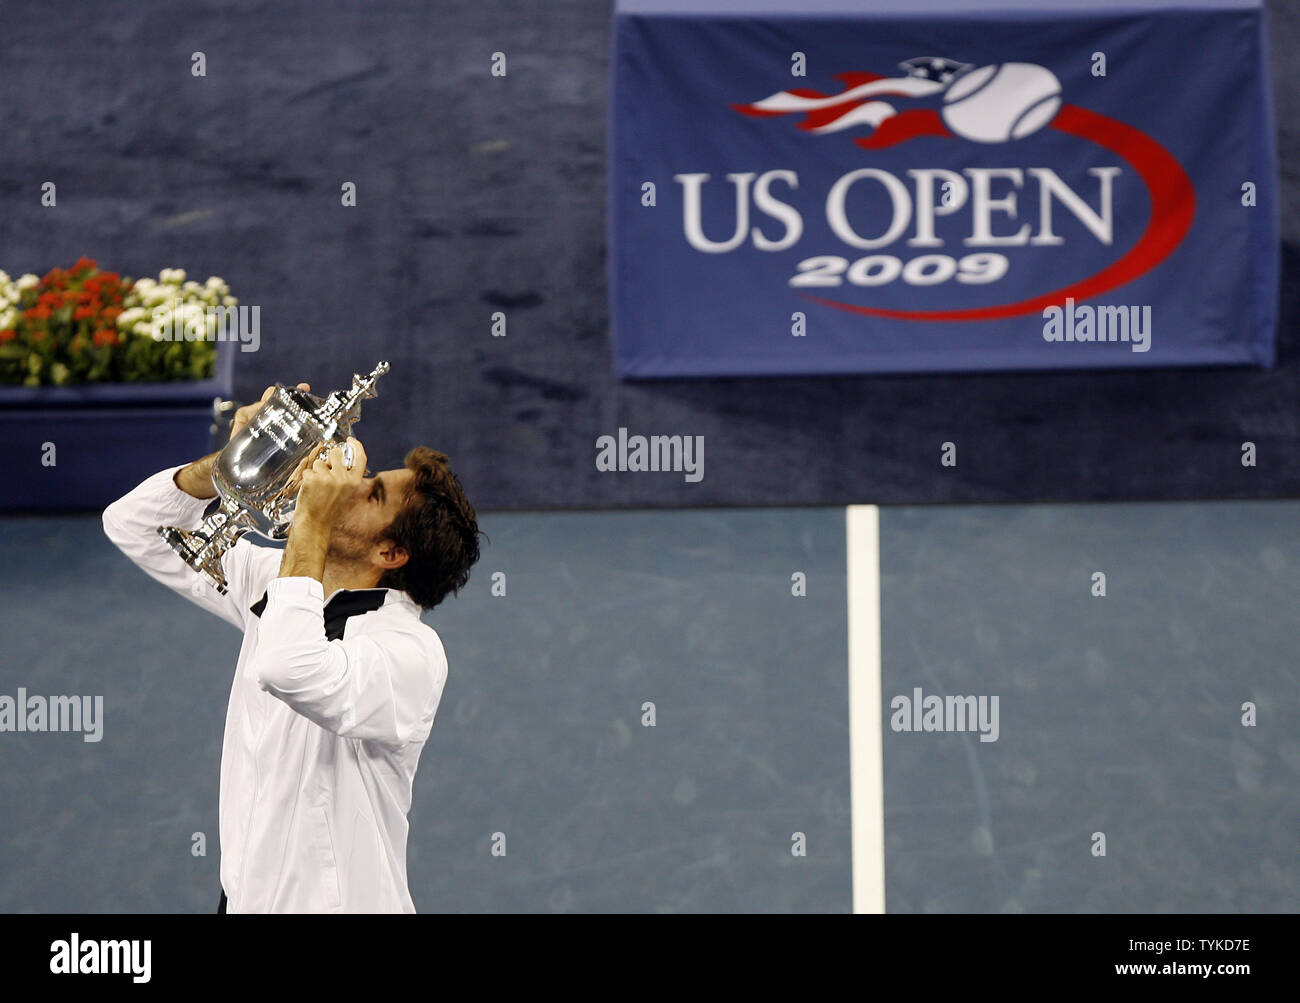 Juan Martin Del Potro of Argentina kisses the champions trophy after defeating Roger Federer of Switzerland in 5 sets in the mens final in Arthur Ashe Stadium at the US Open Tennis Championships at the Billie Jean King National Tennis Center in New York on September 14, 2009.  defeated Federer 3-6, 7-6 (5), 4-6, 7-6 (4), 6-2.   UPI/John Angelillo Stock Photo